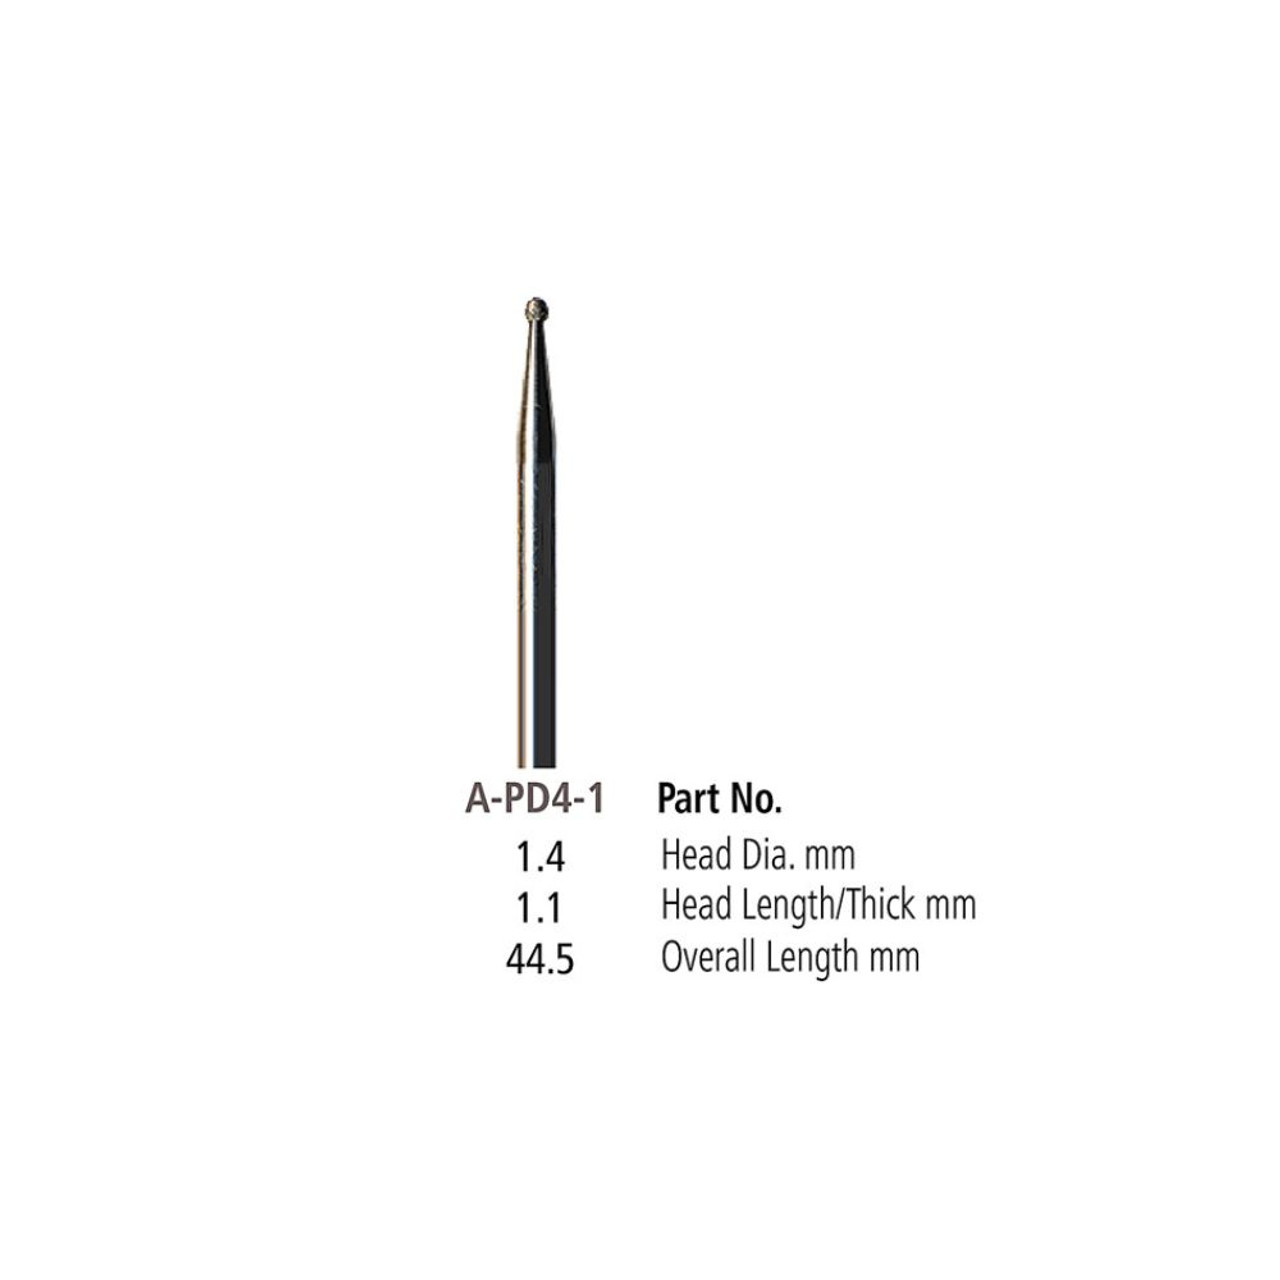 Premium Quality Dumont Plated Diamond Points - Ball - 1.4mm 106-A-PD4-1